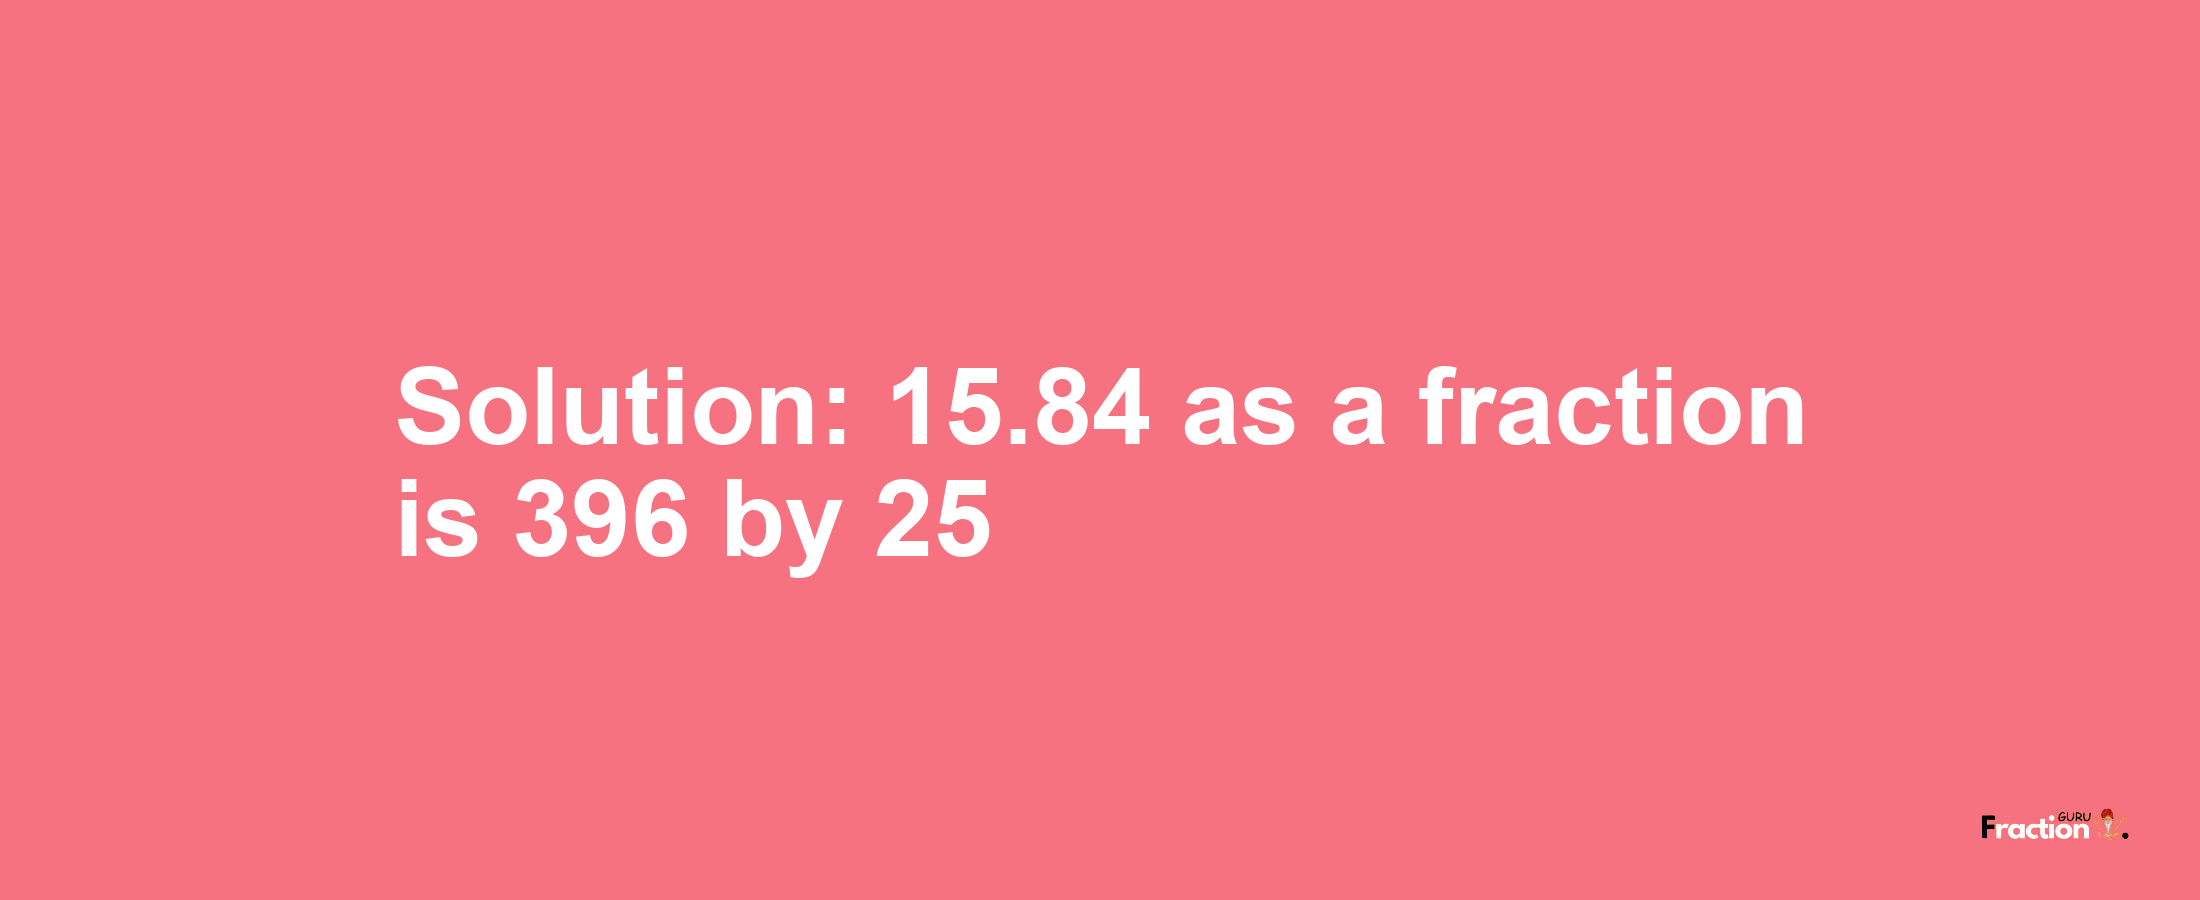 Solution:15.84 as a fraction is 396/25